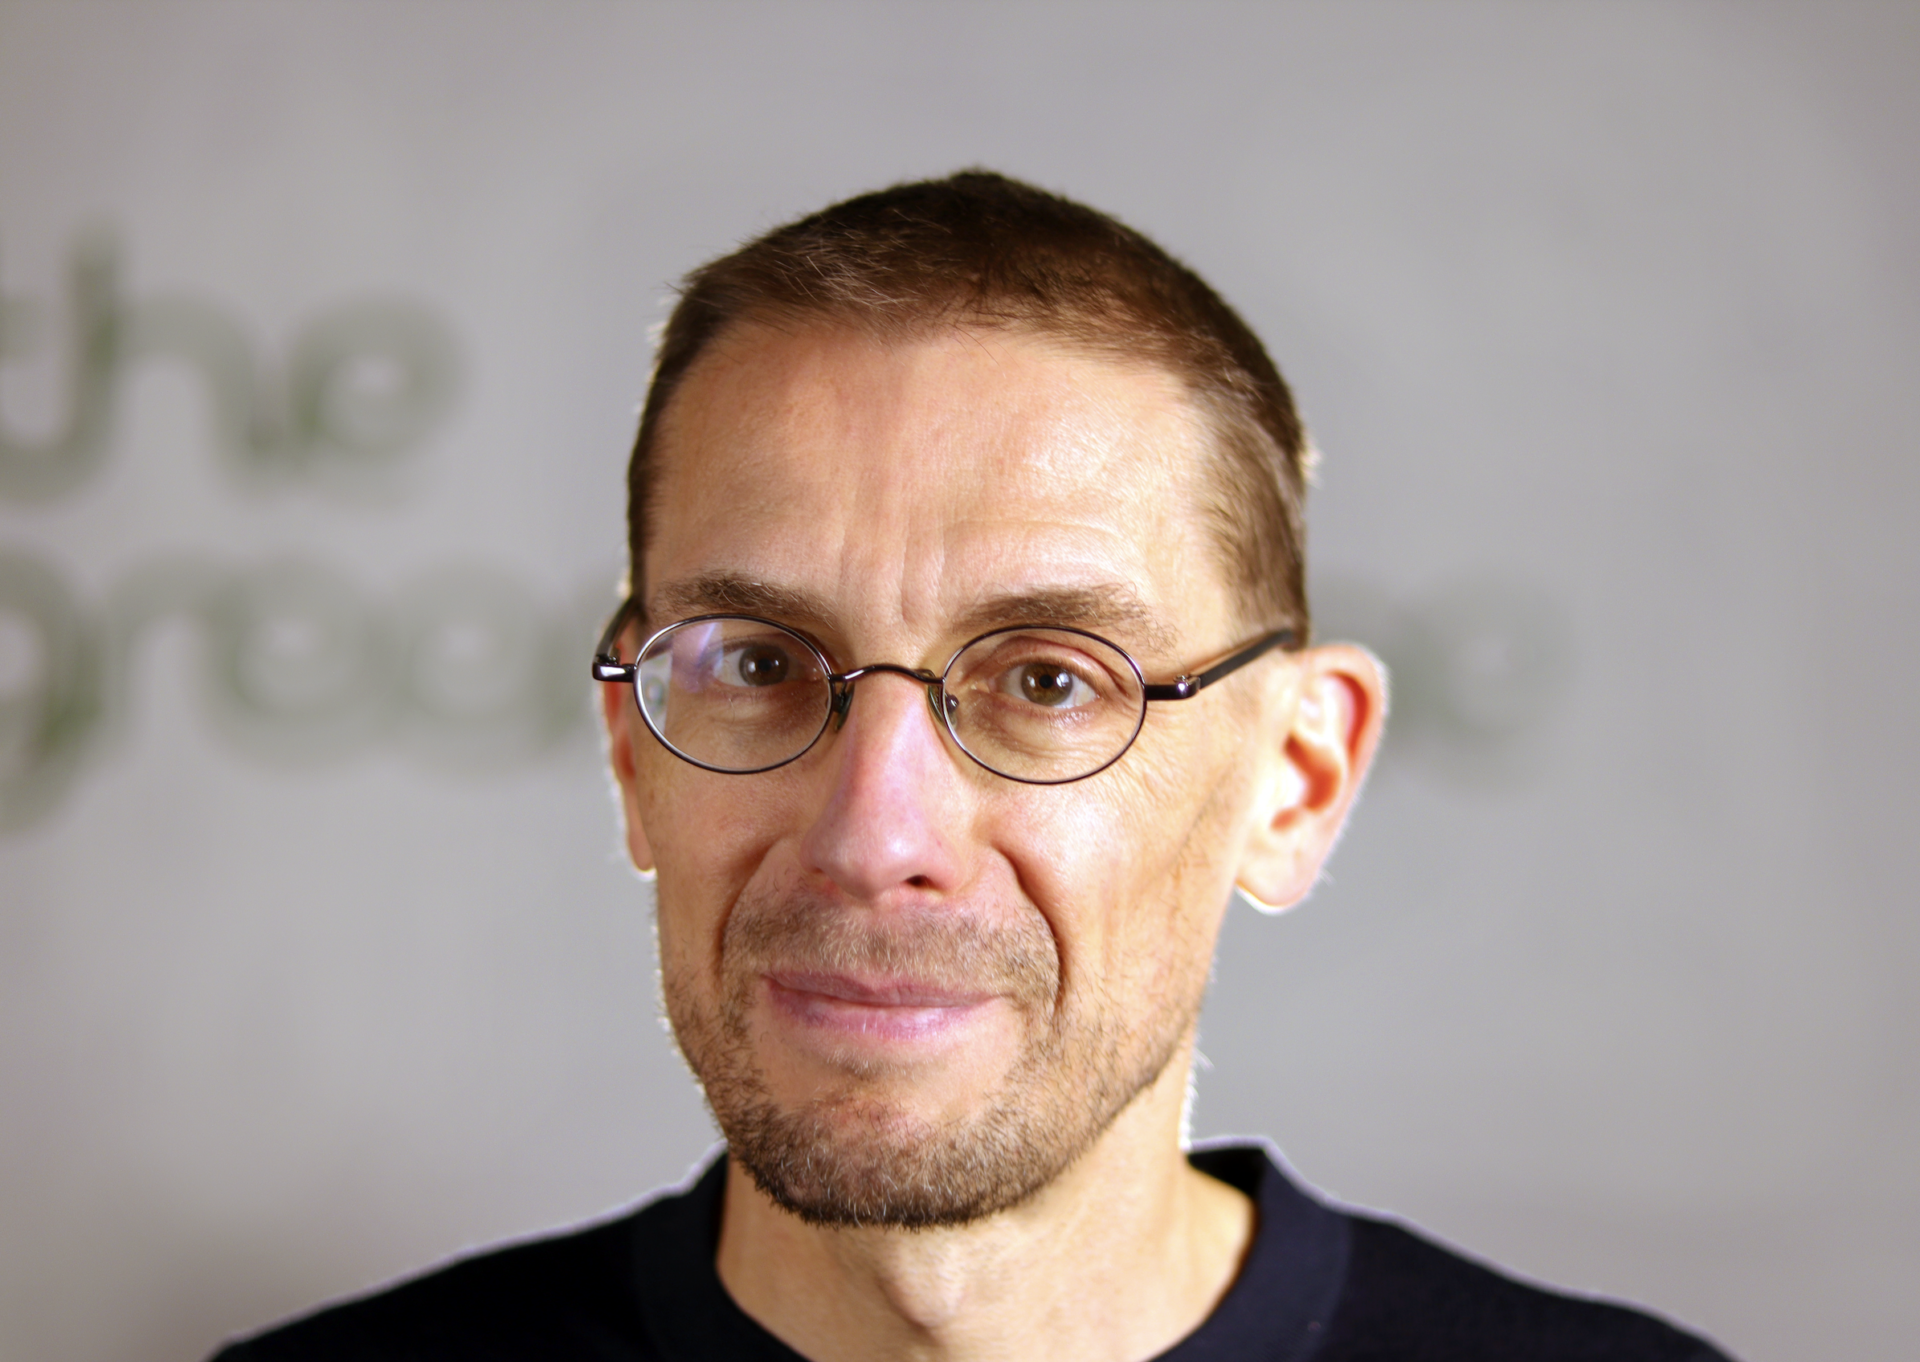 Smiling man with glasses in black shirt